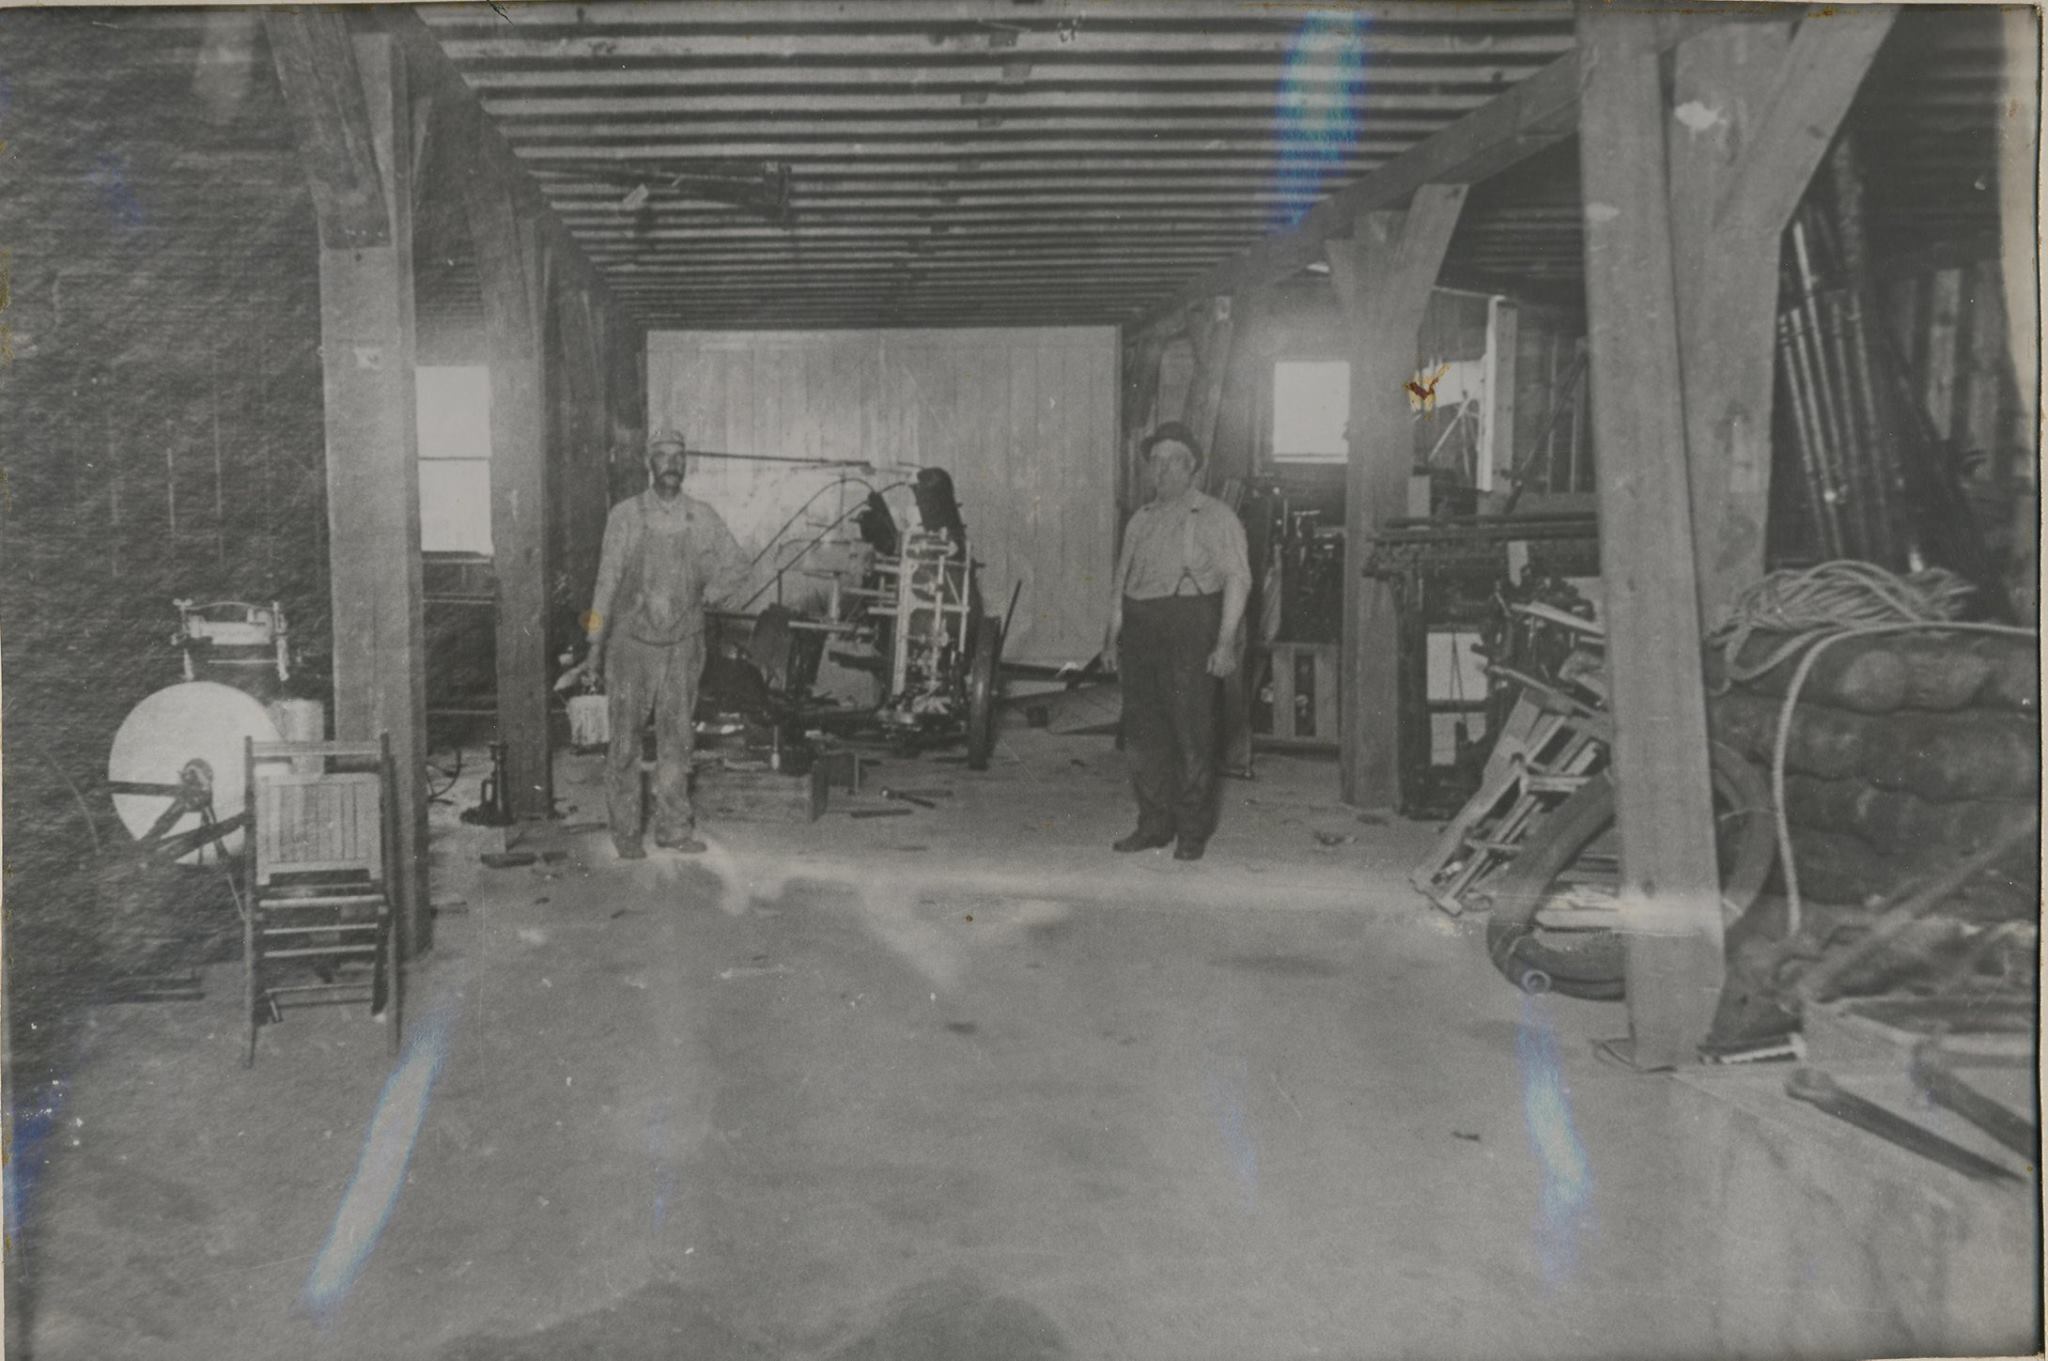 Two men stand in a large, cluttered workshop with wooden beams running across the ceiling. The workshop contains various tools and equipment, including a large machine in the middle and stacks of materials on the right. The men wear work clothes and hats.